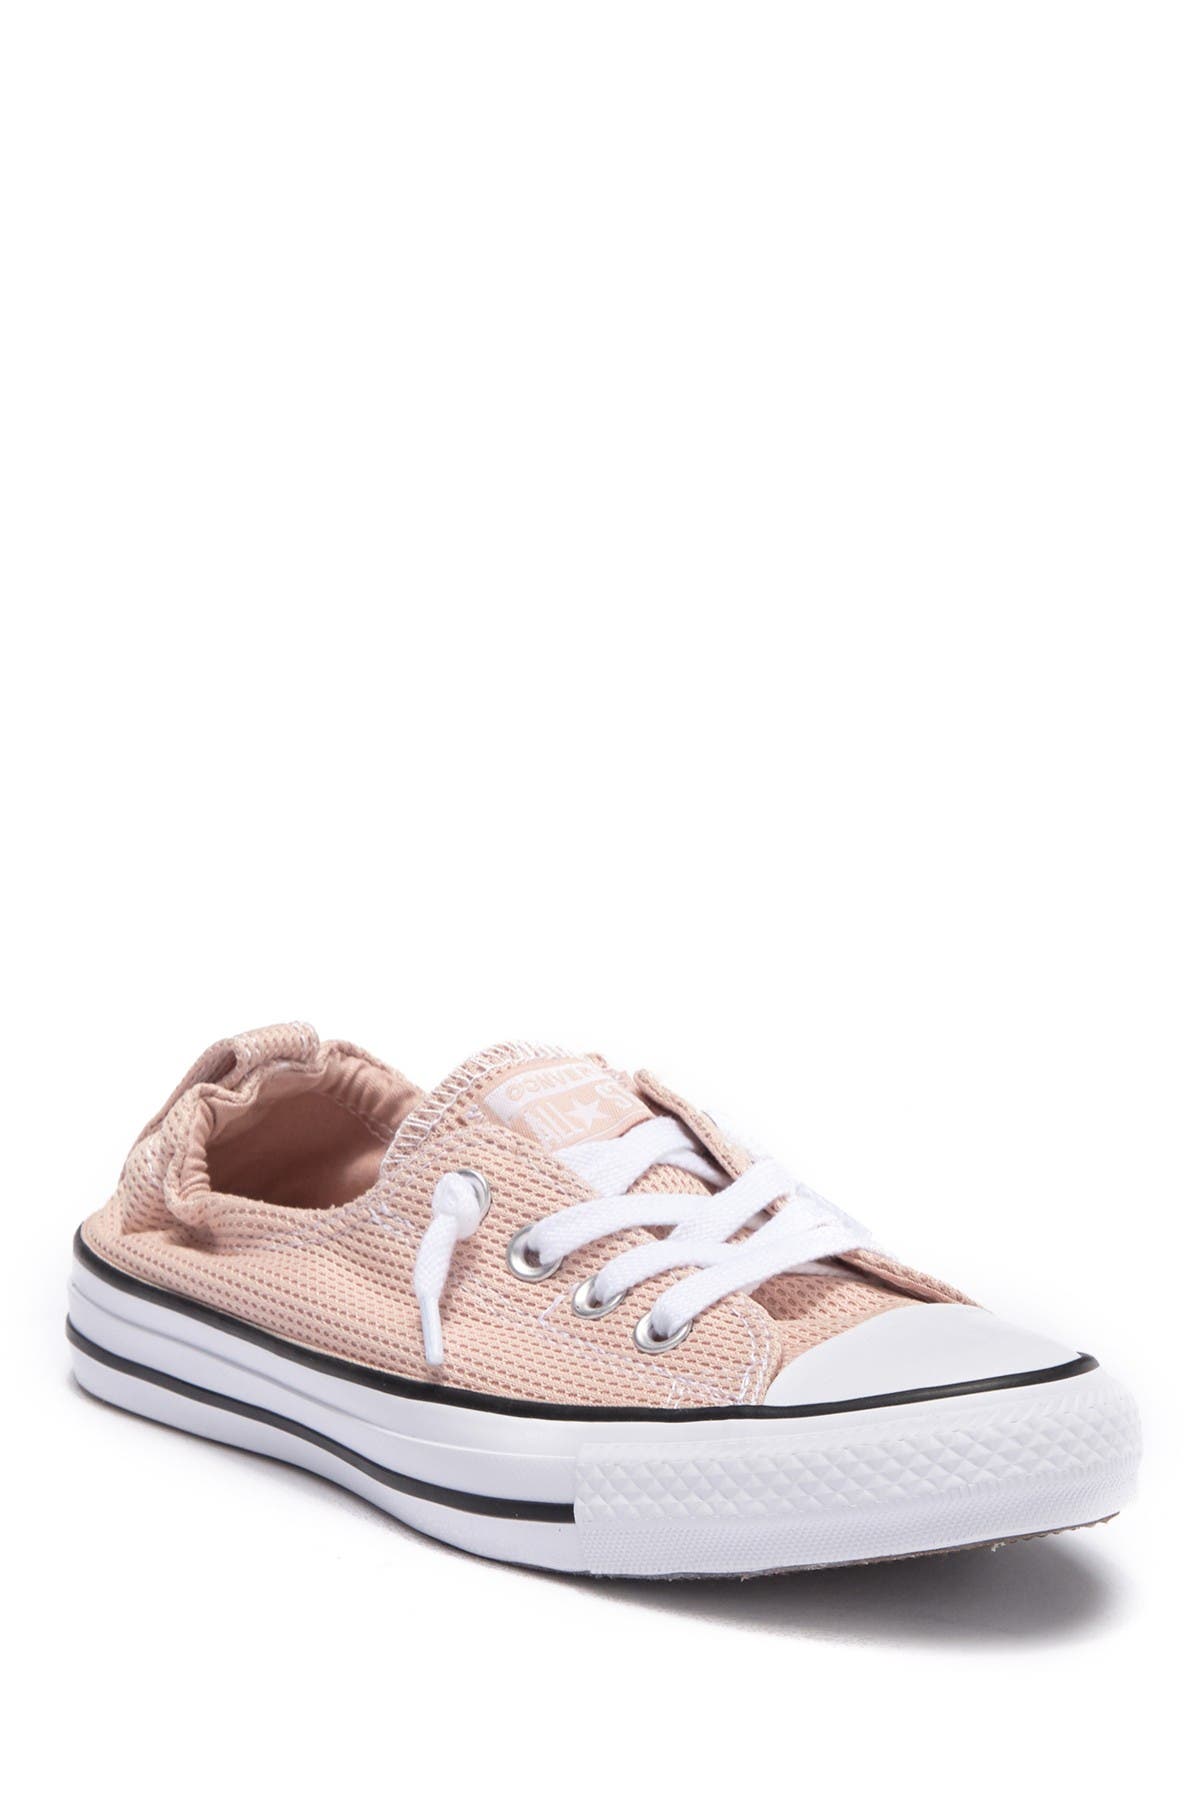 Chuck Taylor All-Star Shoreline Peached 